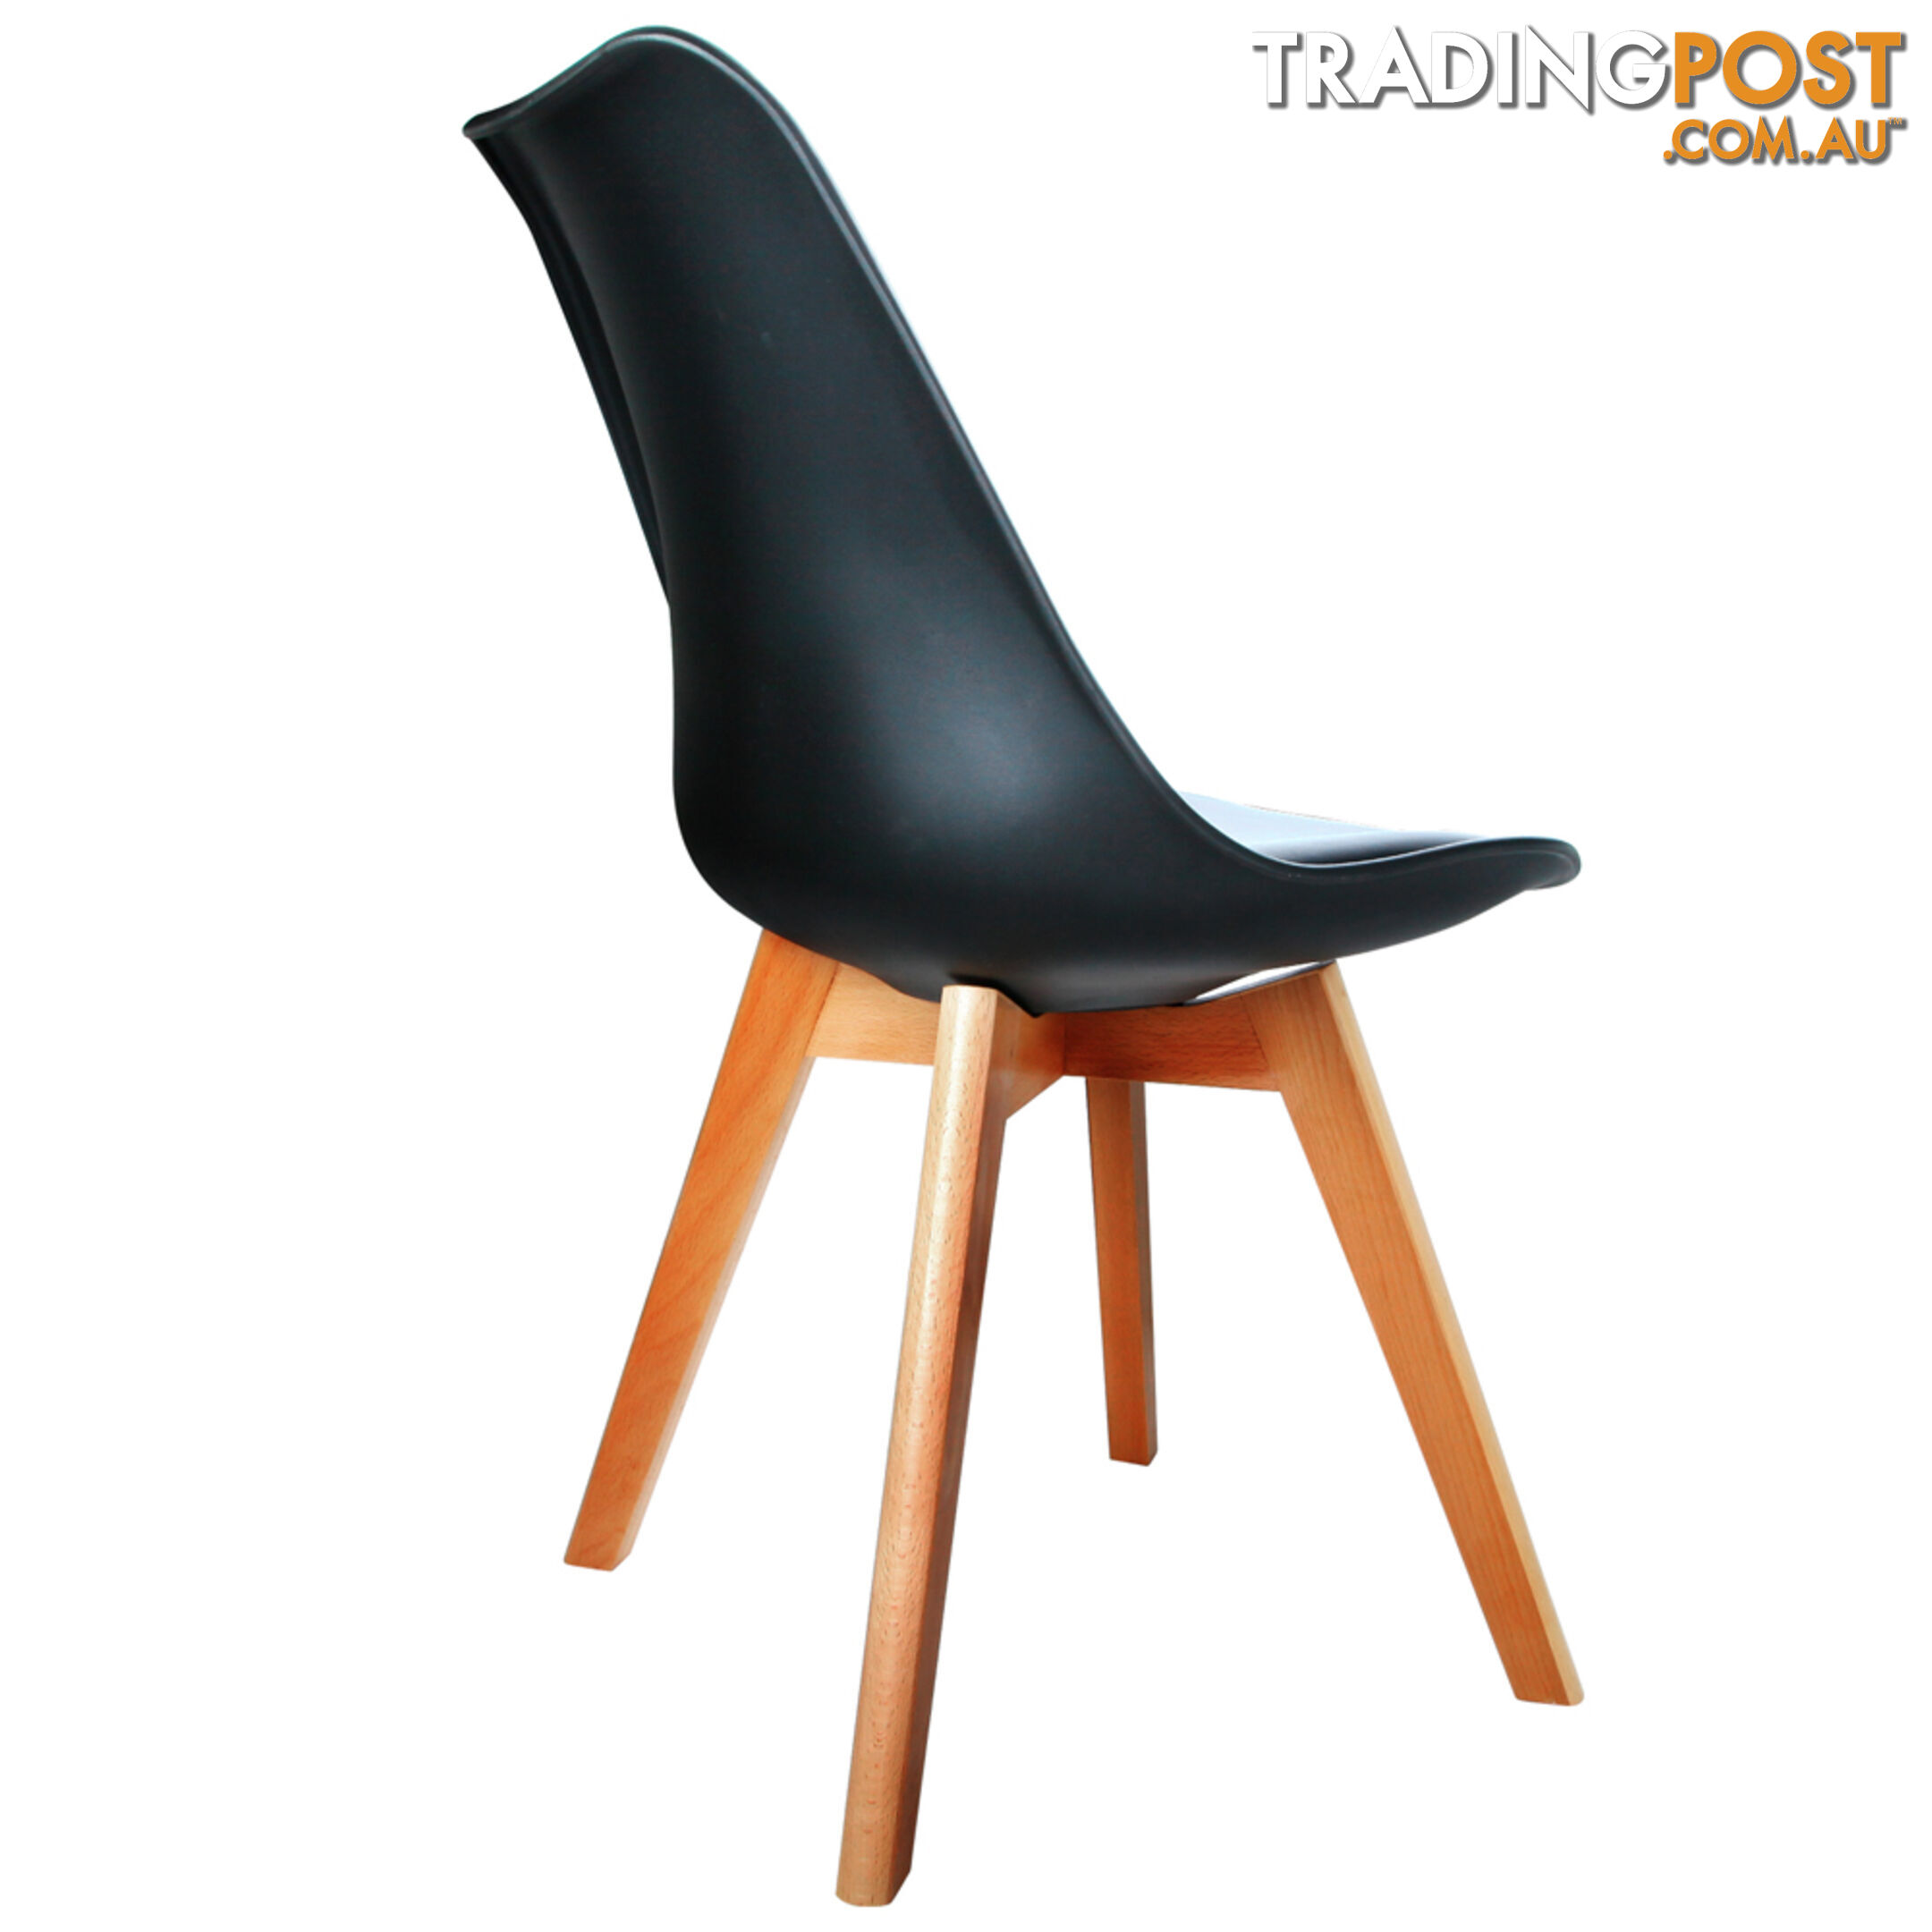 Set of 2 Dining Chair PU Leather Seat Black